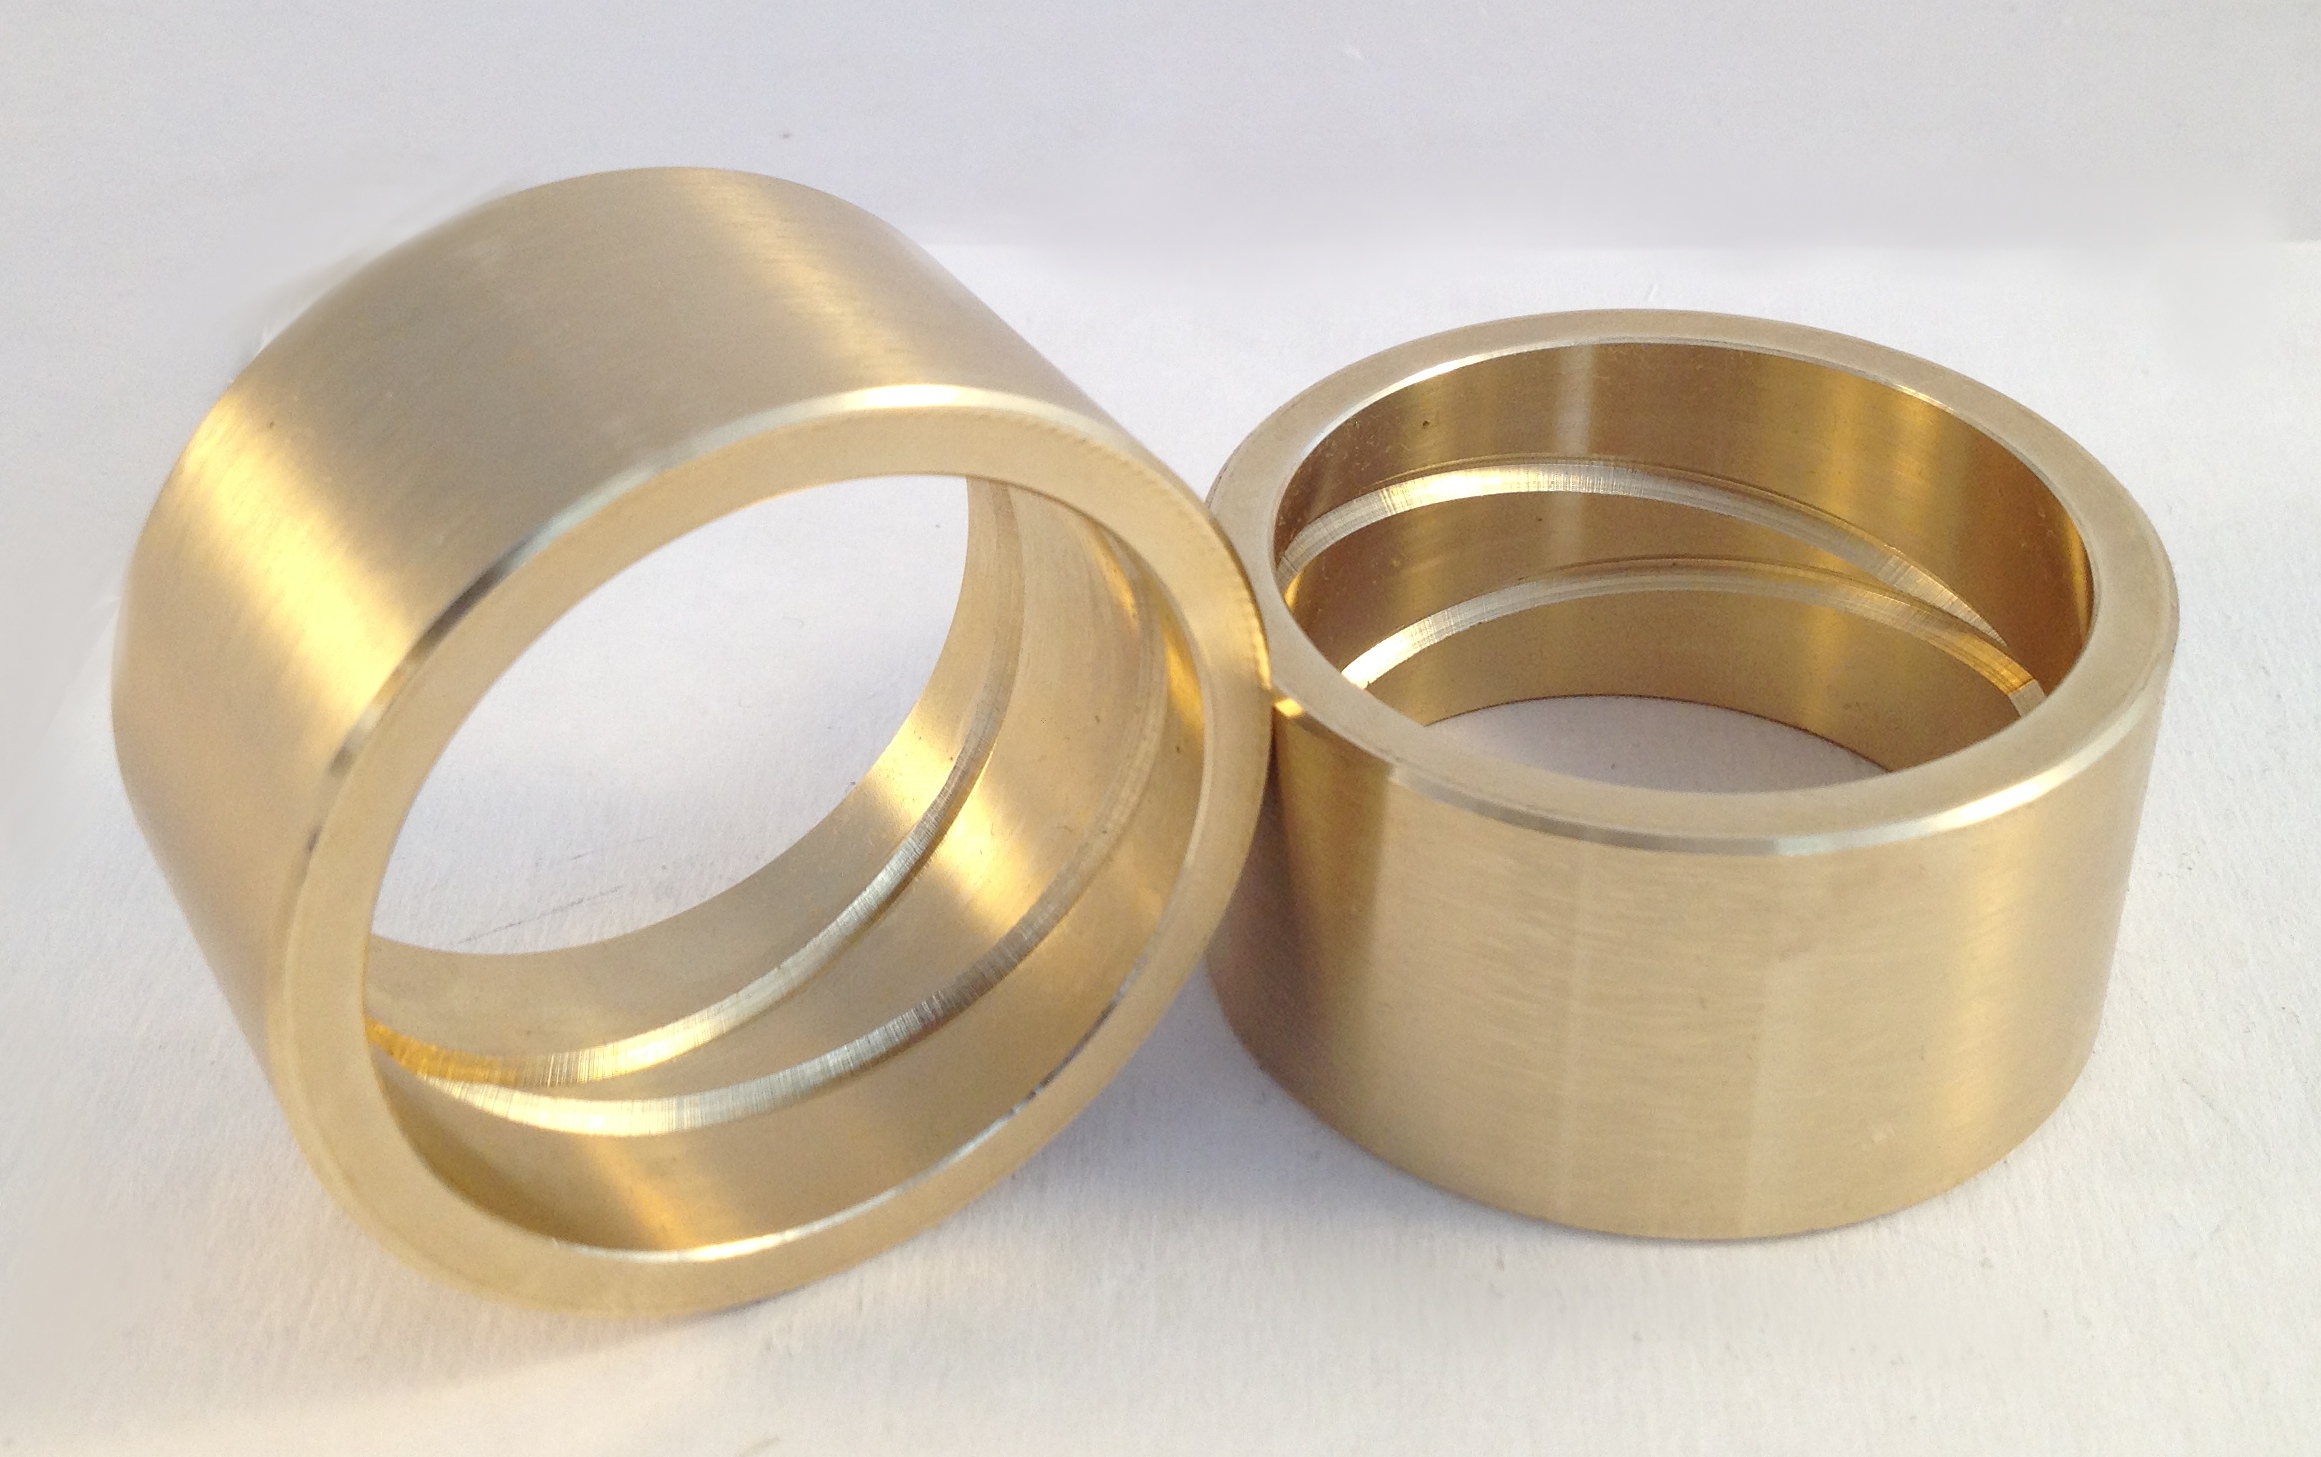 H12A Oil Cup Self Aligning Sleeve Lubricated Bearing Made in The USA Galvanized Steel Shell with Bronze Bushing Bore ID 3/4 Quantity 2: Triangle Mfg